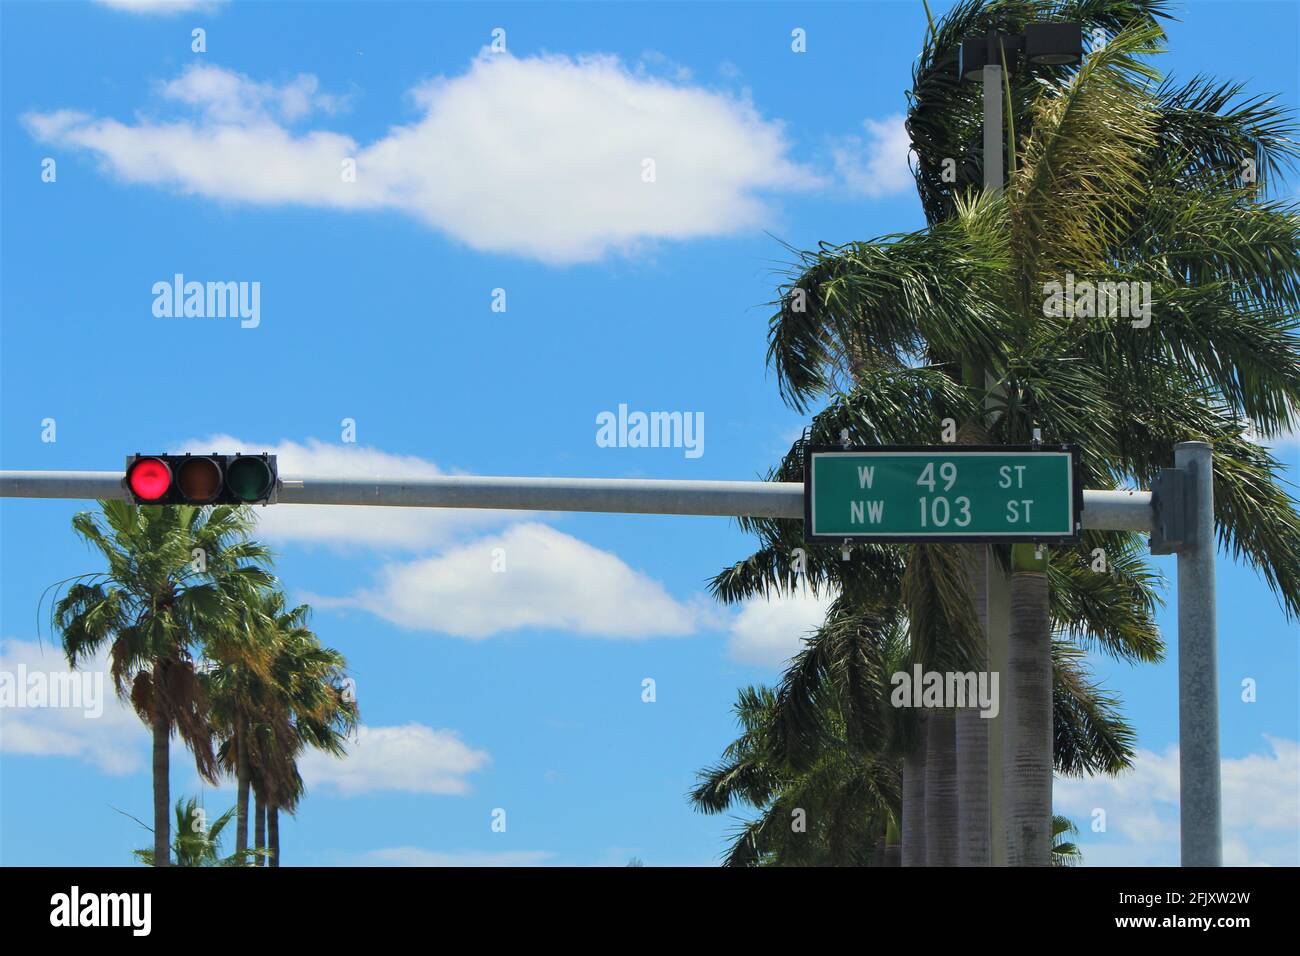 Hialeah street sign, 49 street also known as 103 street. A very known street among the Hispanic community. Stock Photo